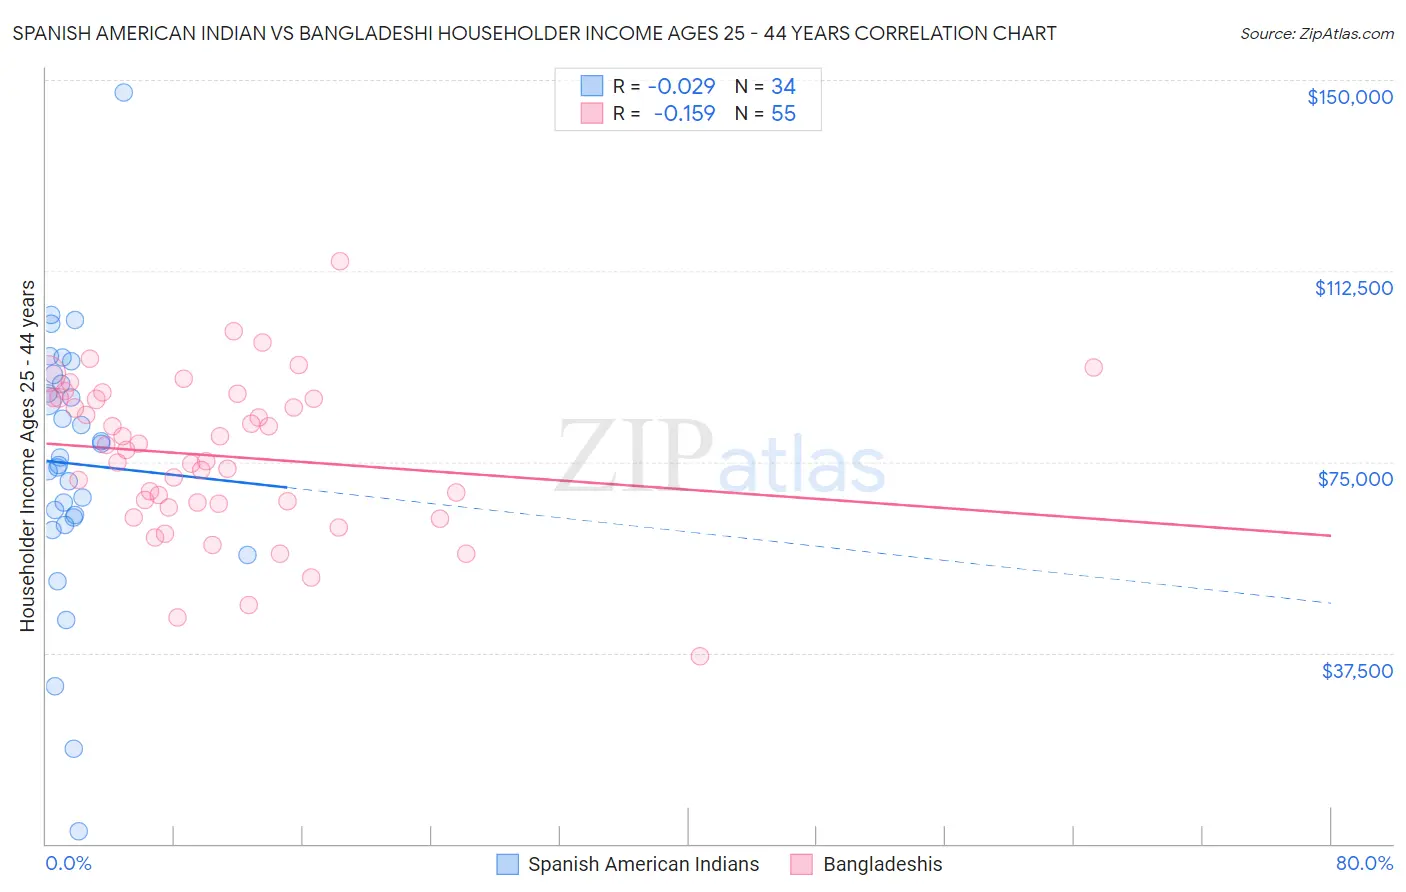 Spanish American Indian vs Bangladeshi Householder Income Ages 25 - 44 years